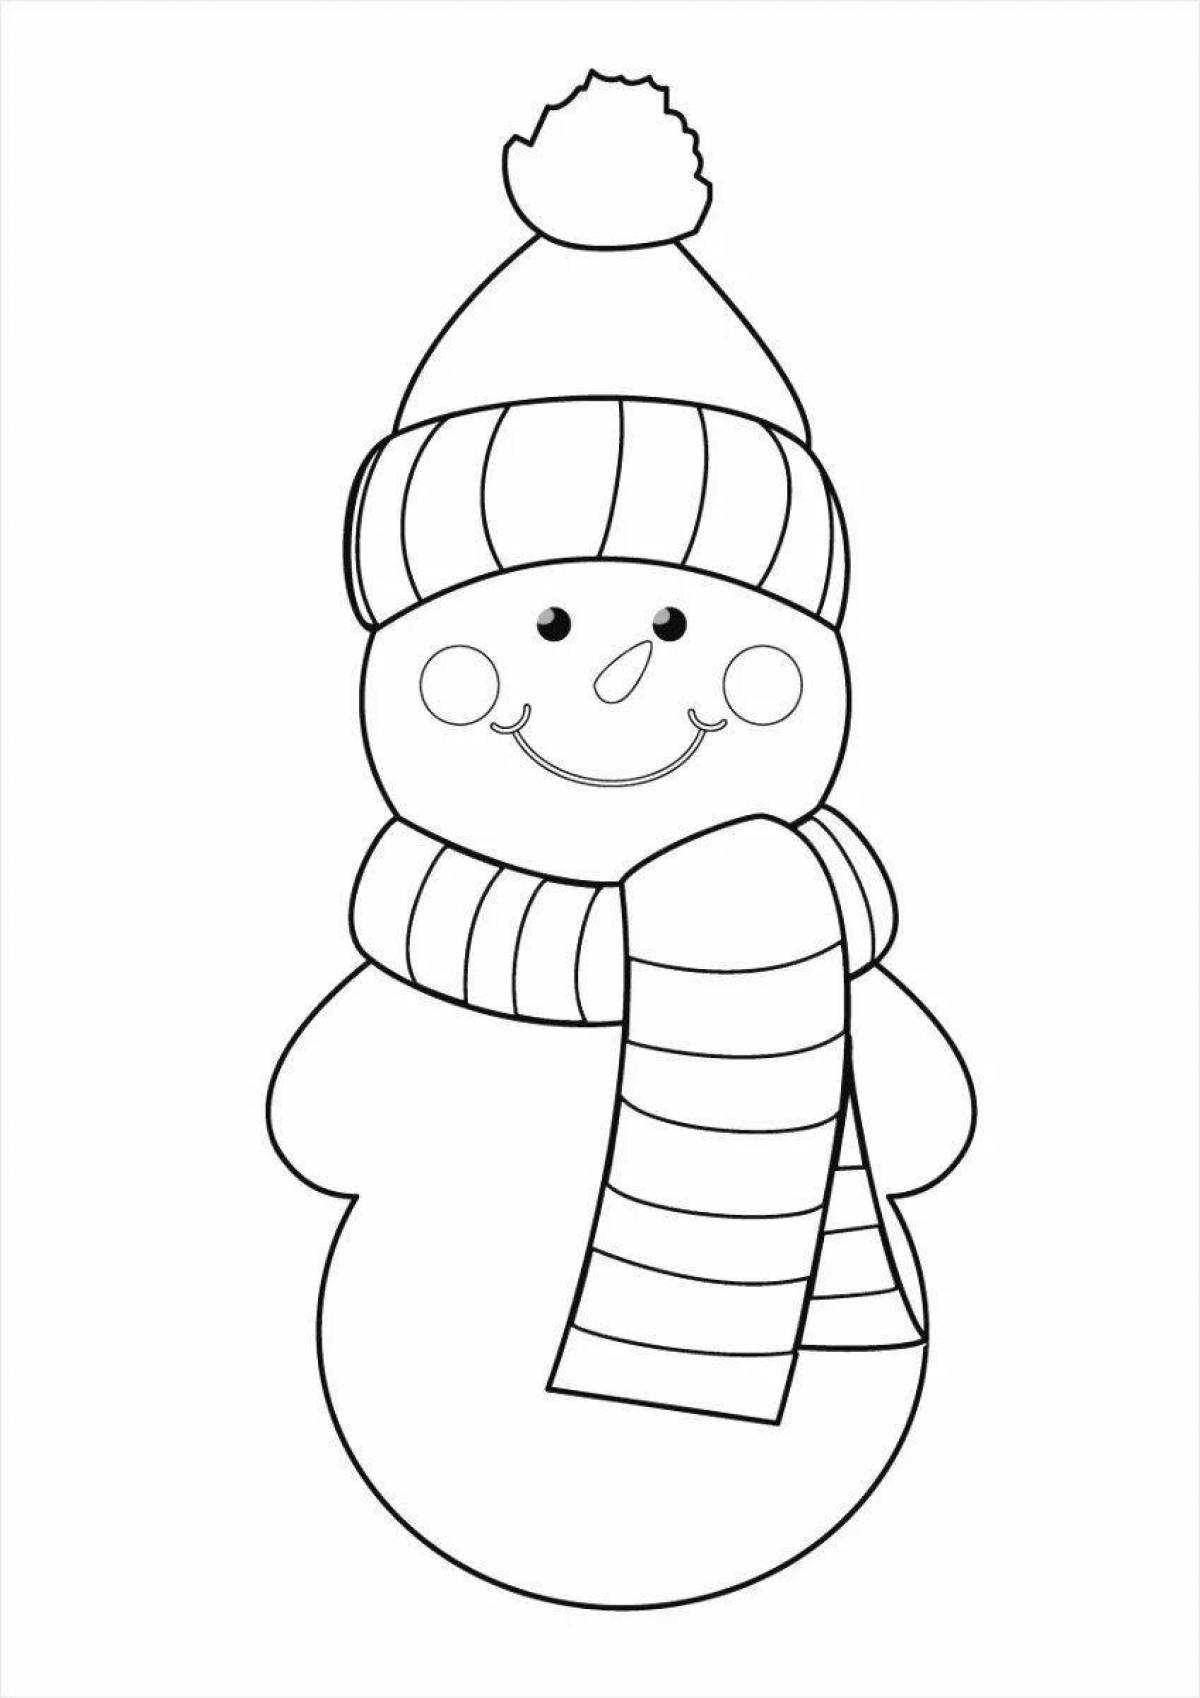 Exquisite snowman coloring book for kids 2 3